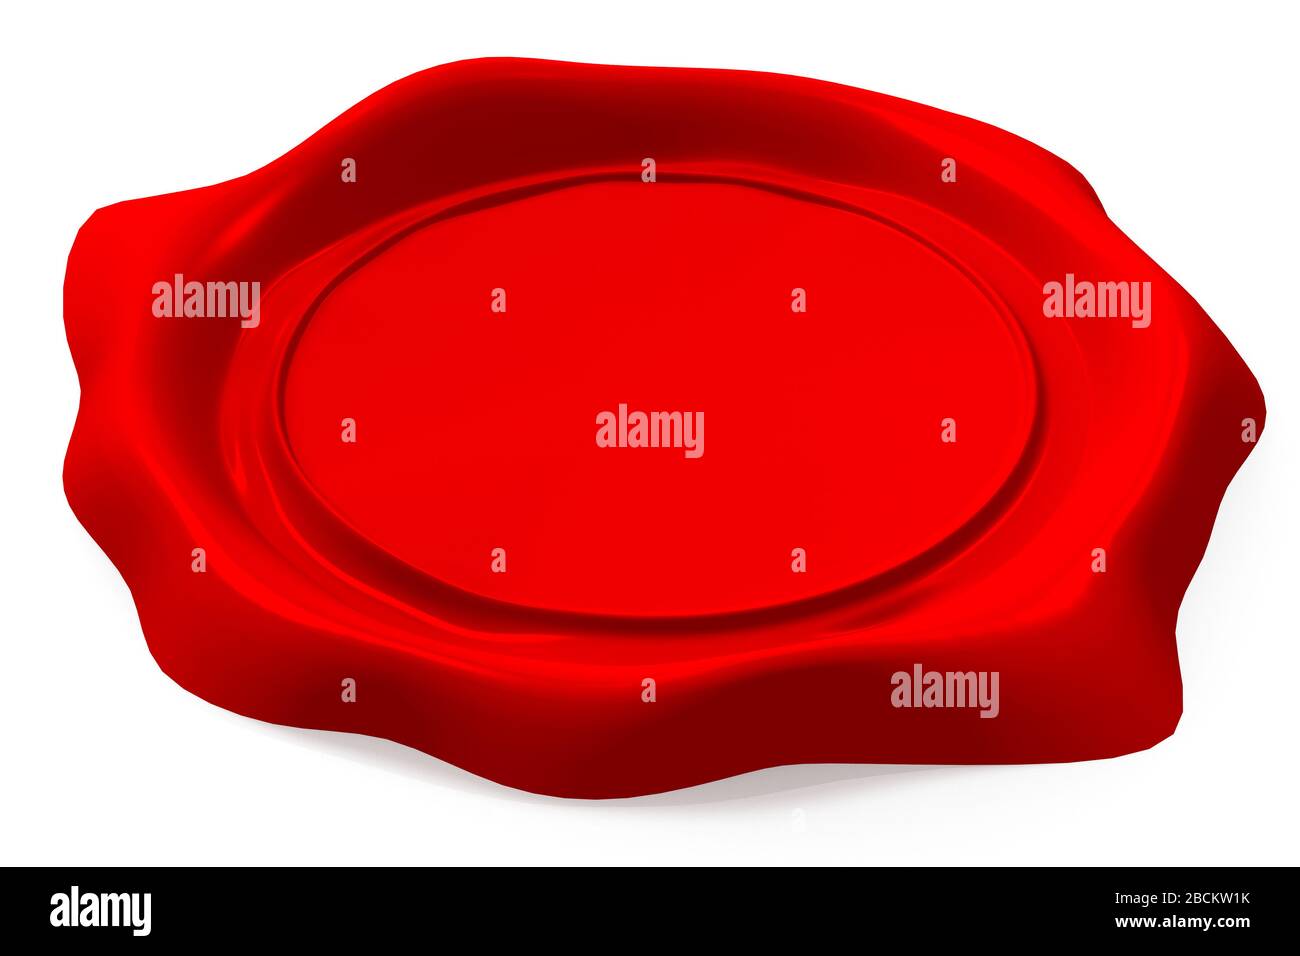 3D red wax seal illustration Stock Photo - Alamy